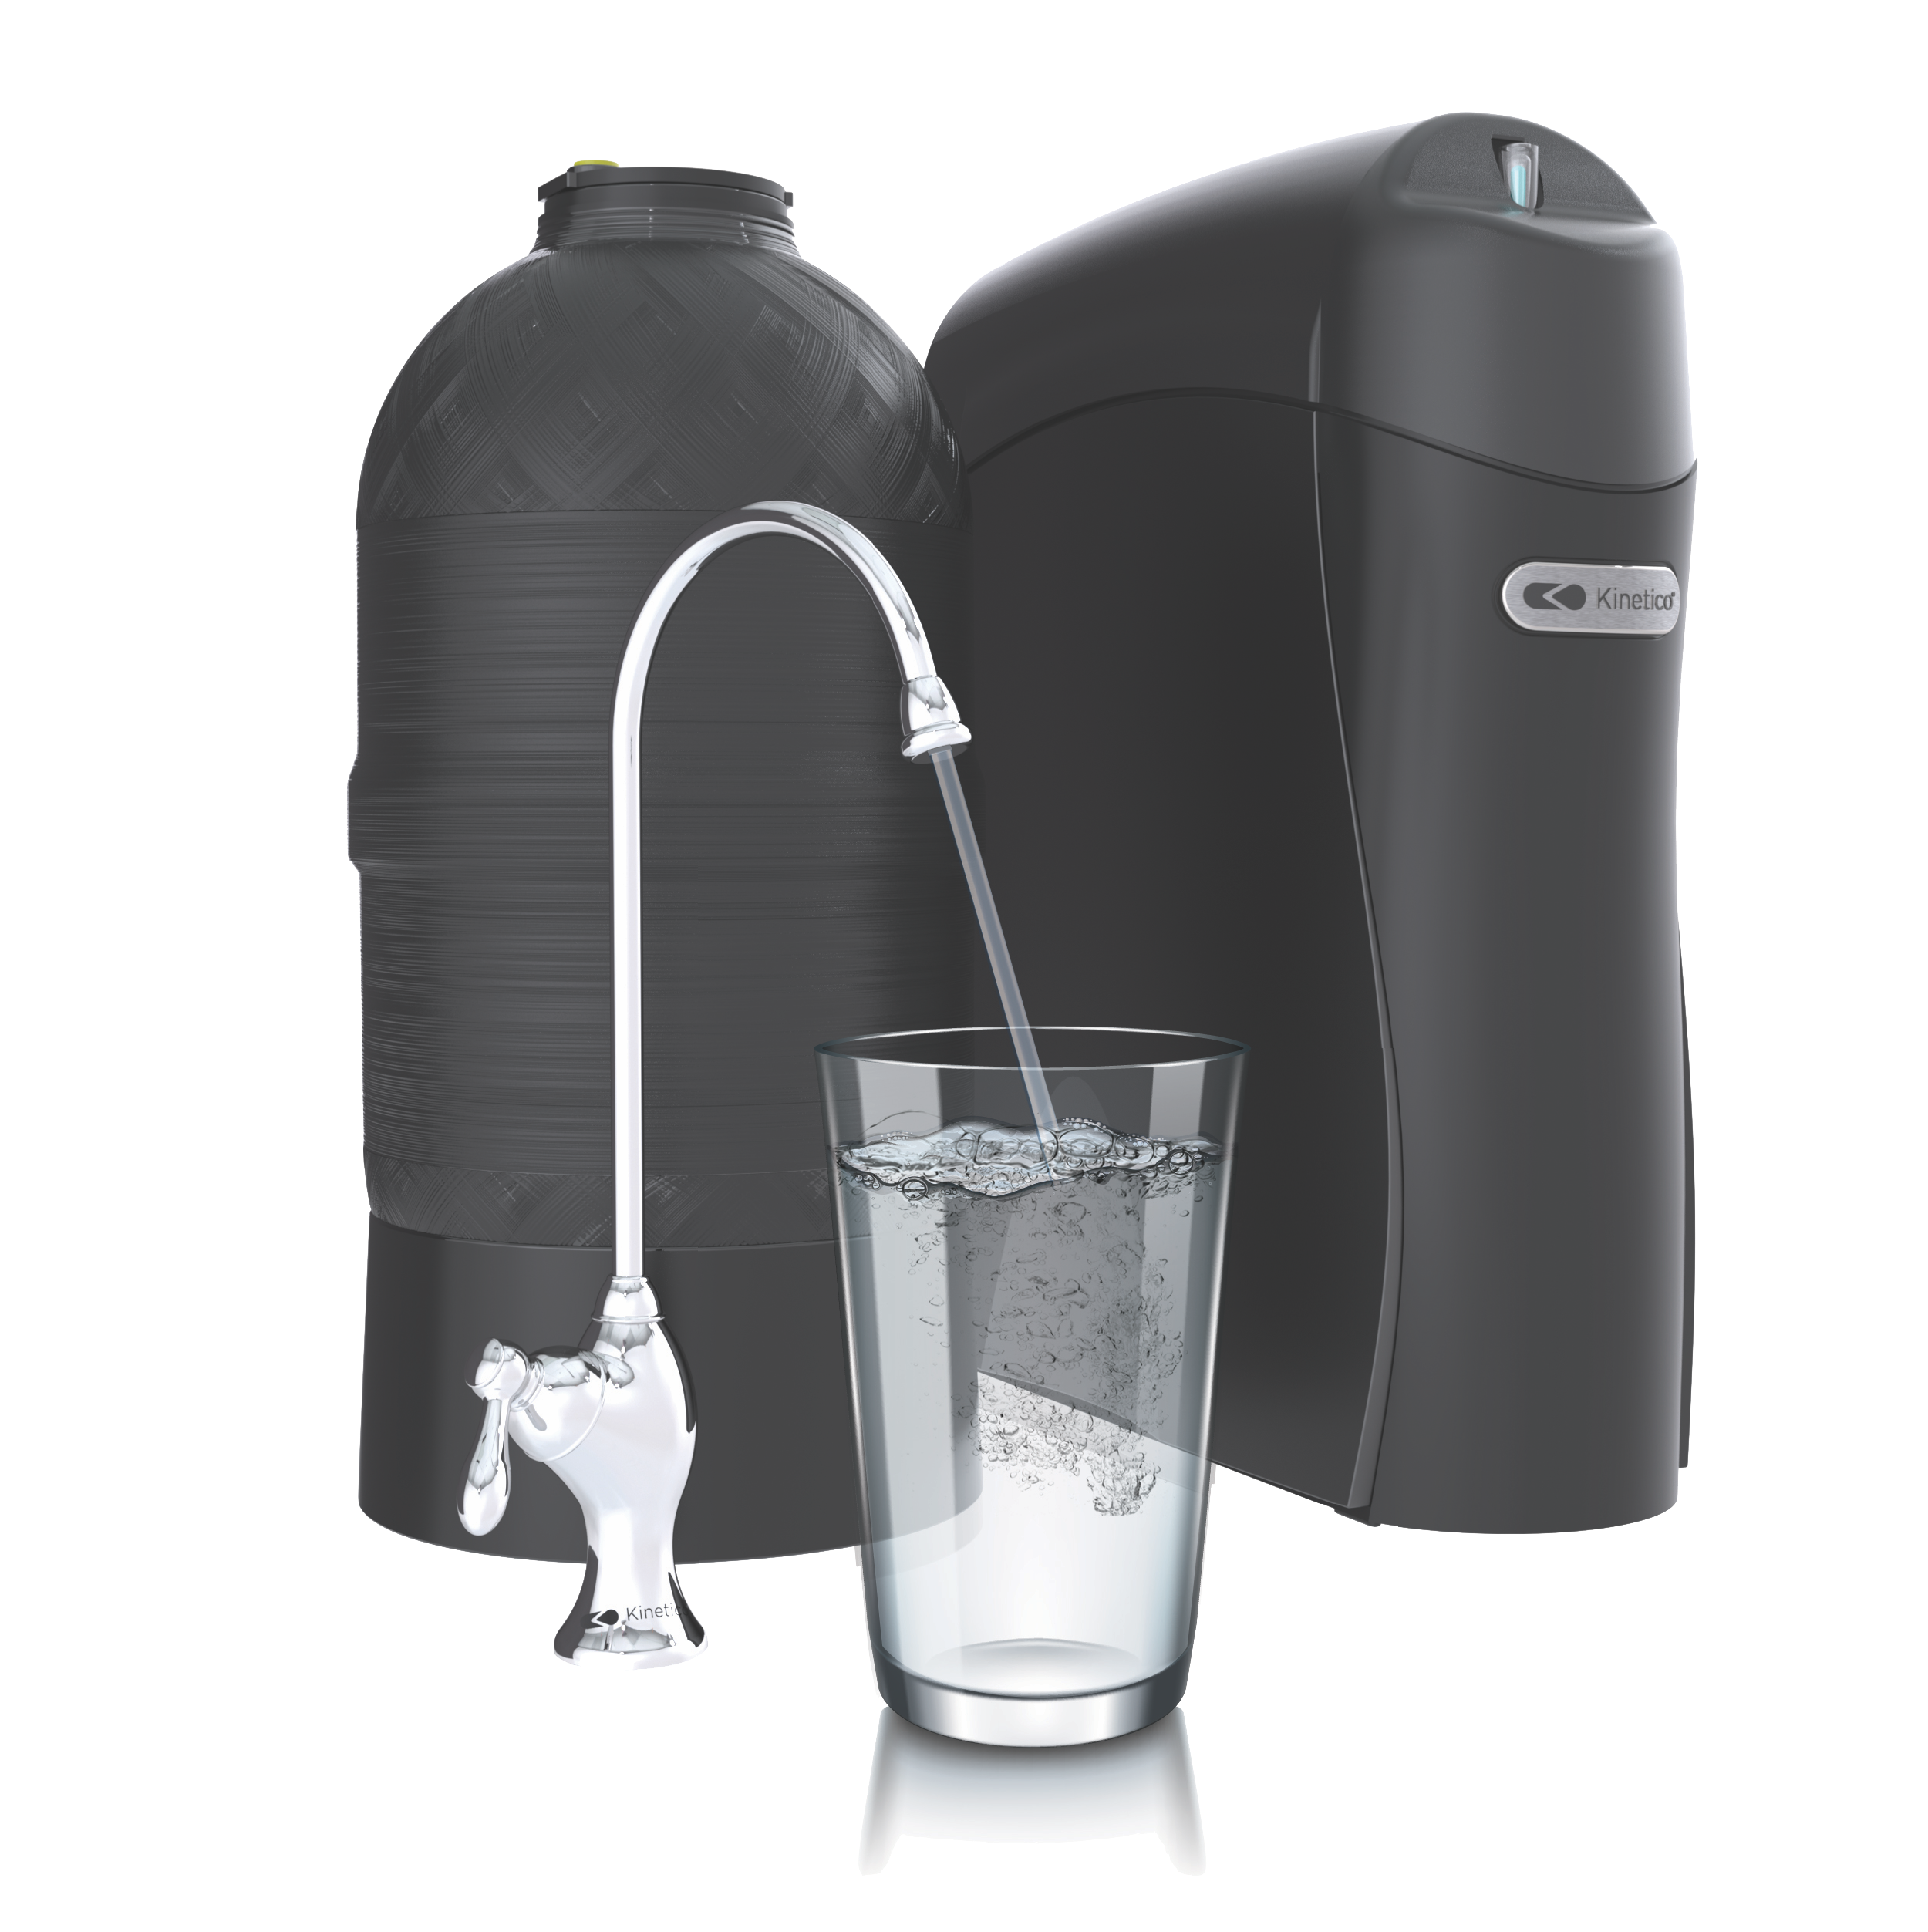 Kinetico Drinking Water Systems